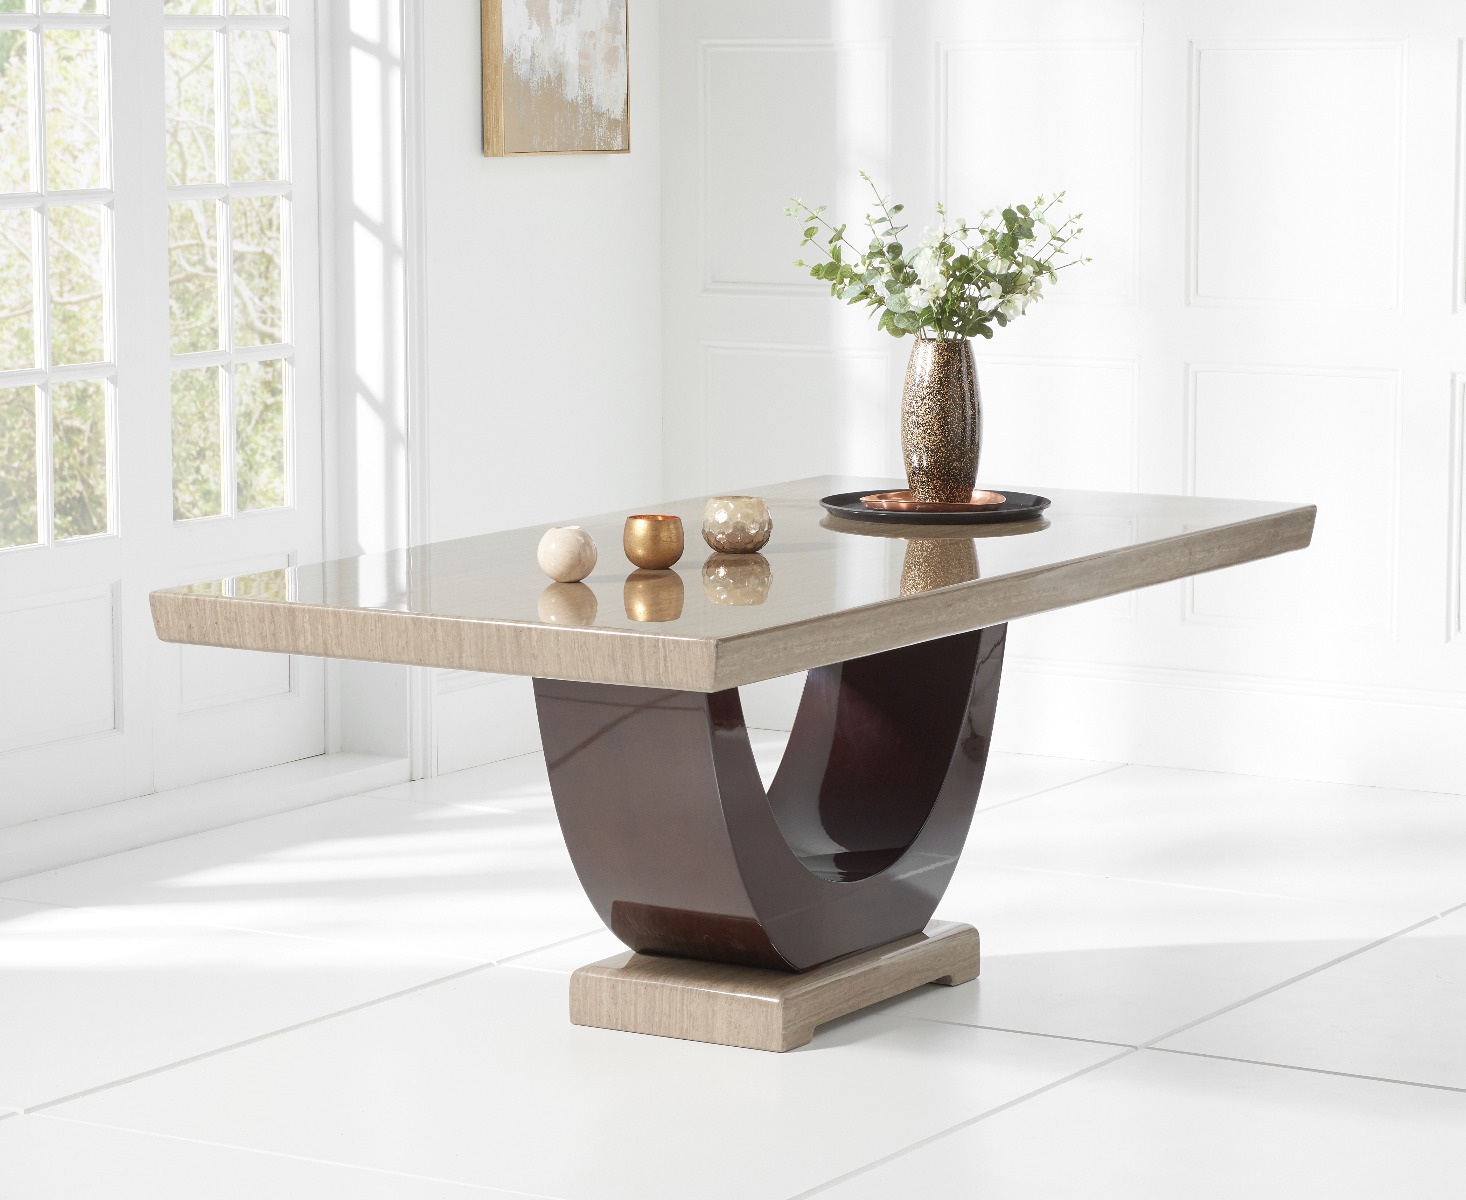 Photo 1 of Raphael 200cm brown pedestal marble dining table with 10 brown novara chairs